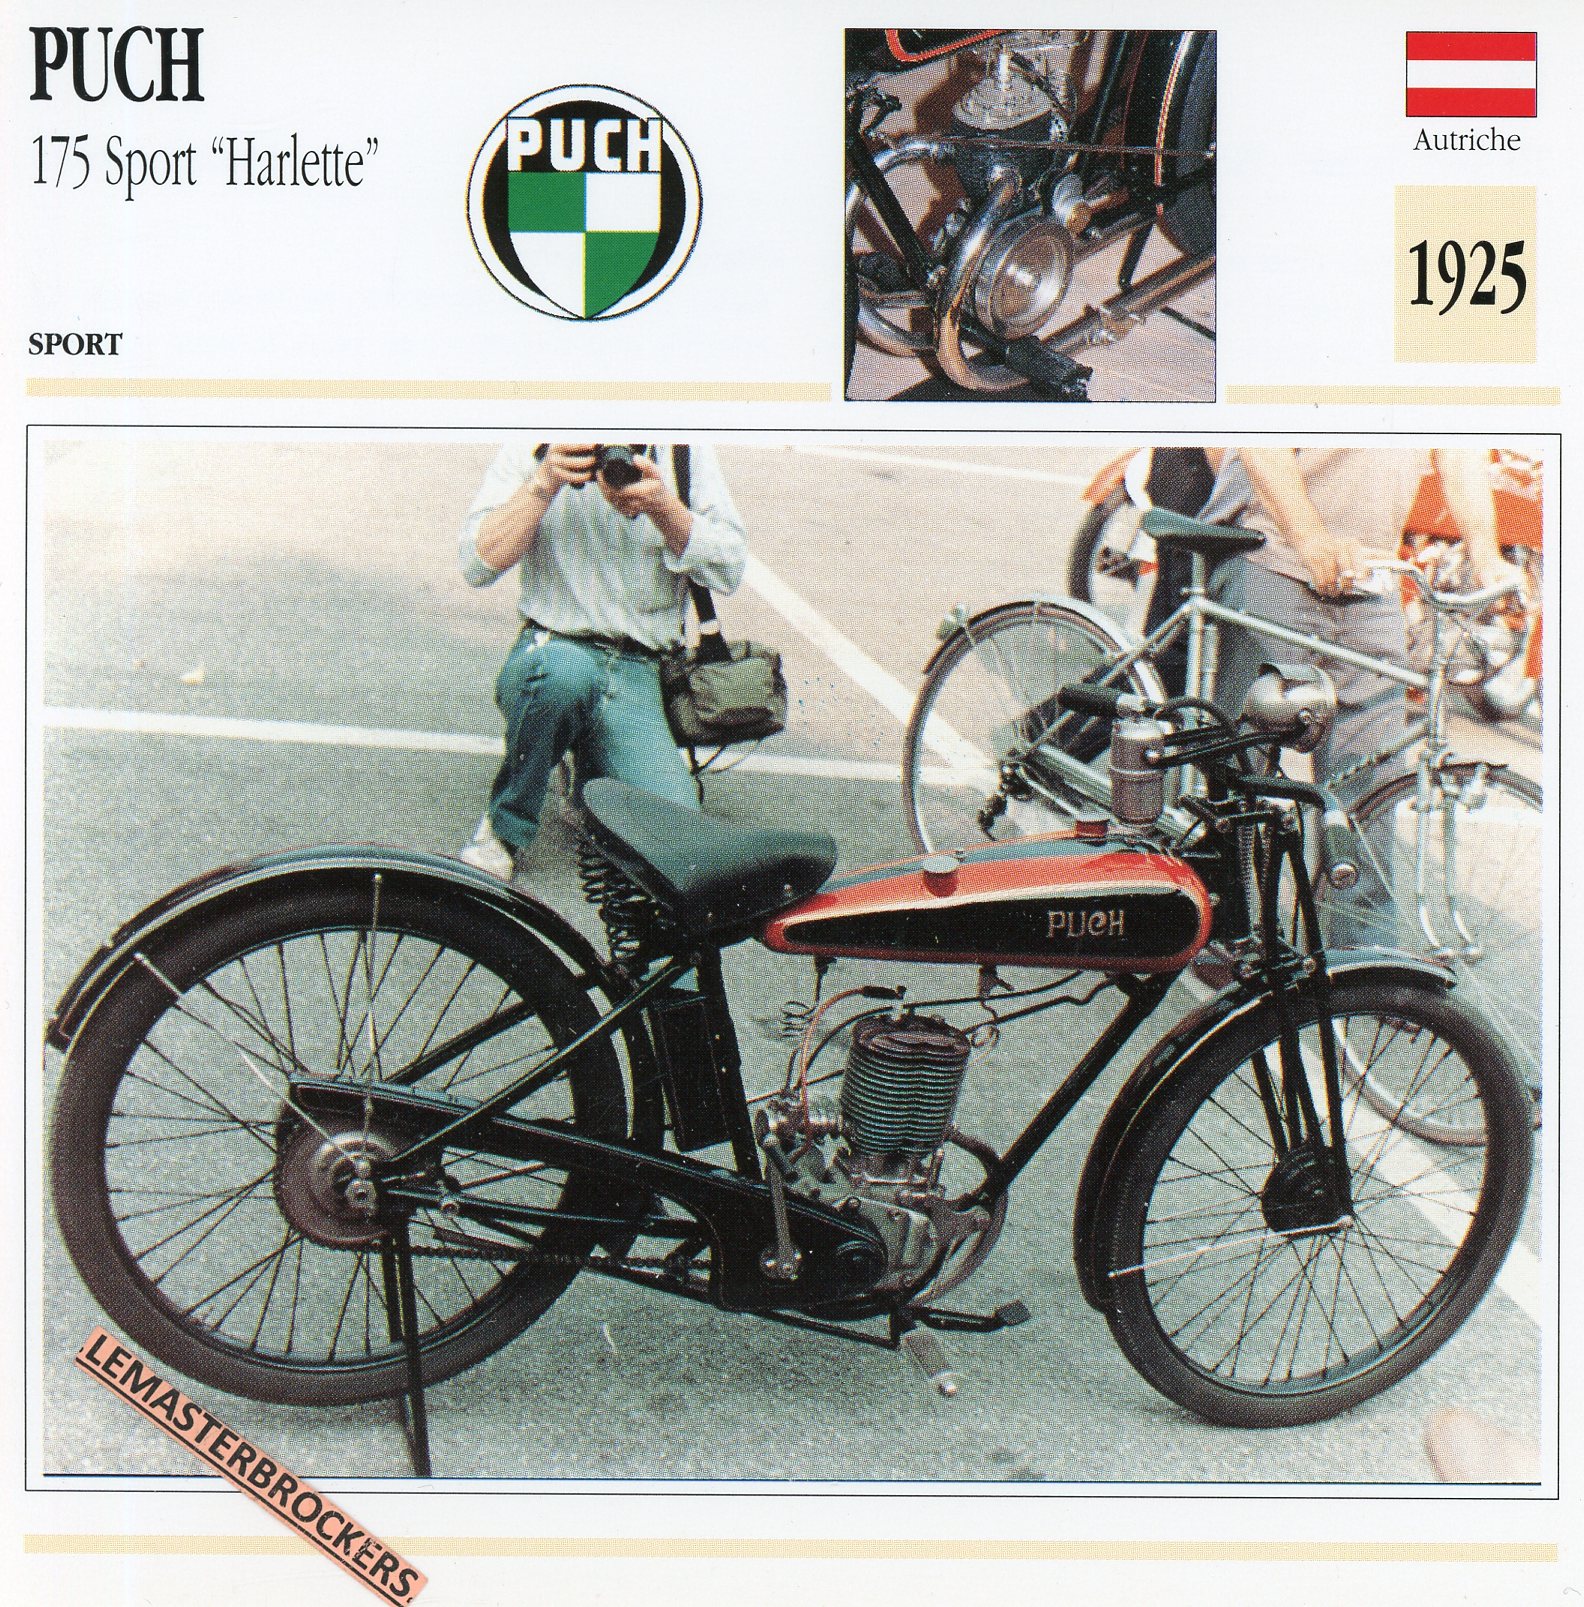 PUCH-175-HARLETTE-1925-FICHE-MOTO-MOTORCYCLE-CARDS-ATLAS-LEMASTERBROCKERS